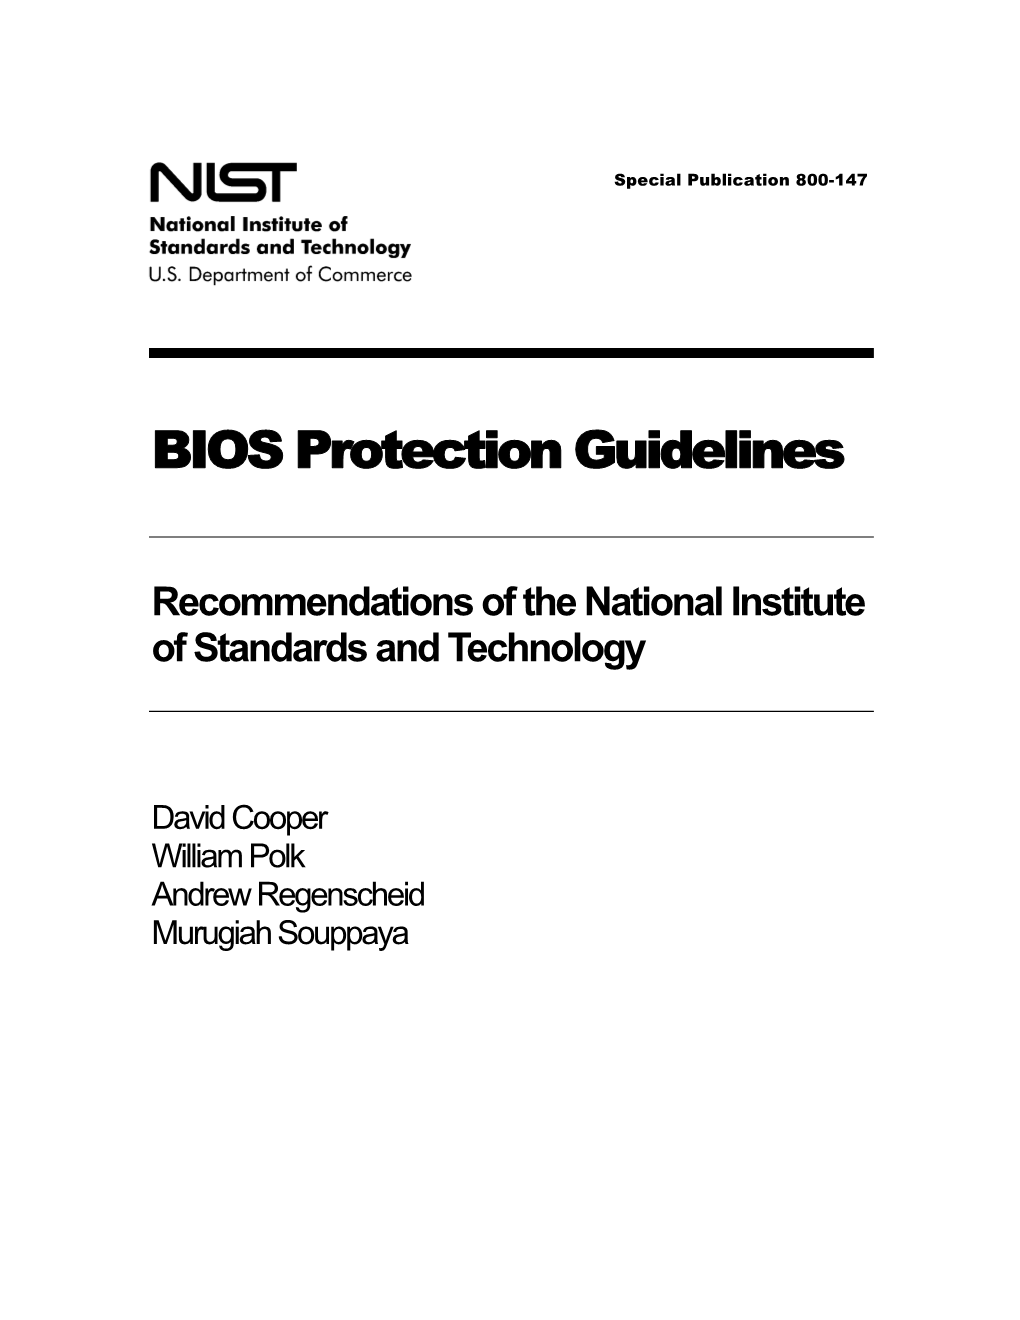 NIST SP 800-147, BIOS Protection Guidelines